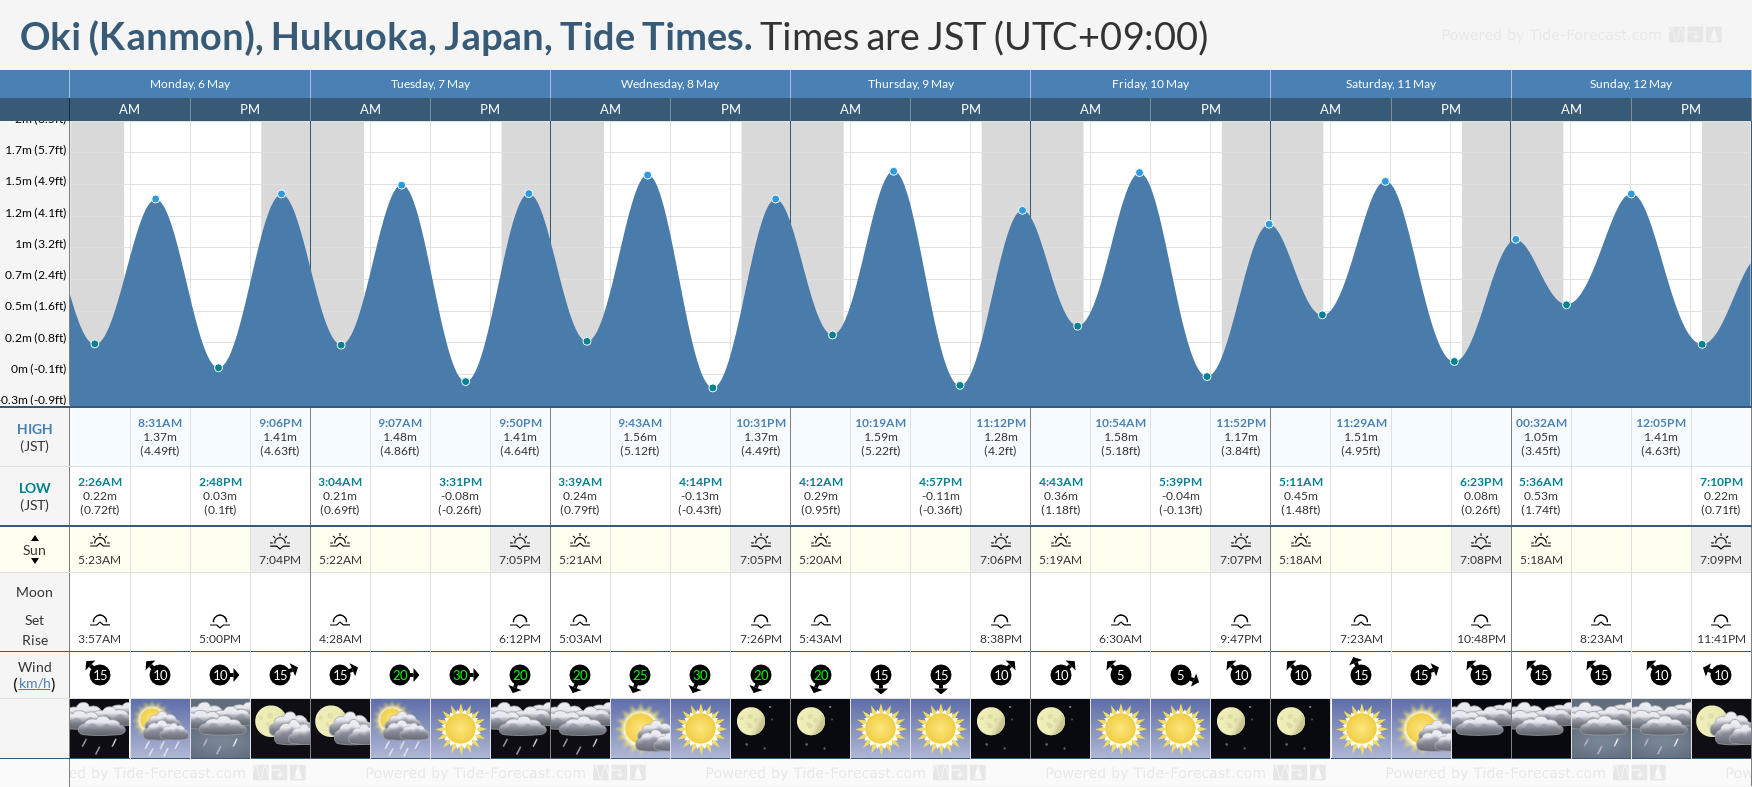 Oki (Kanmon), Hukuoka, Japan Tide Chart including high and low tide tide times for the next 7 days